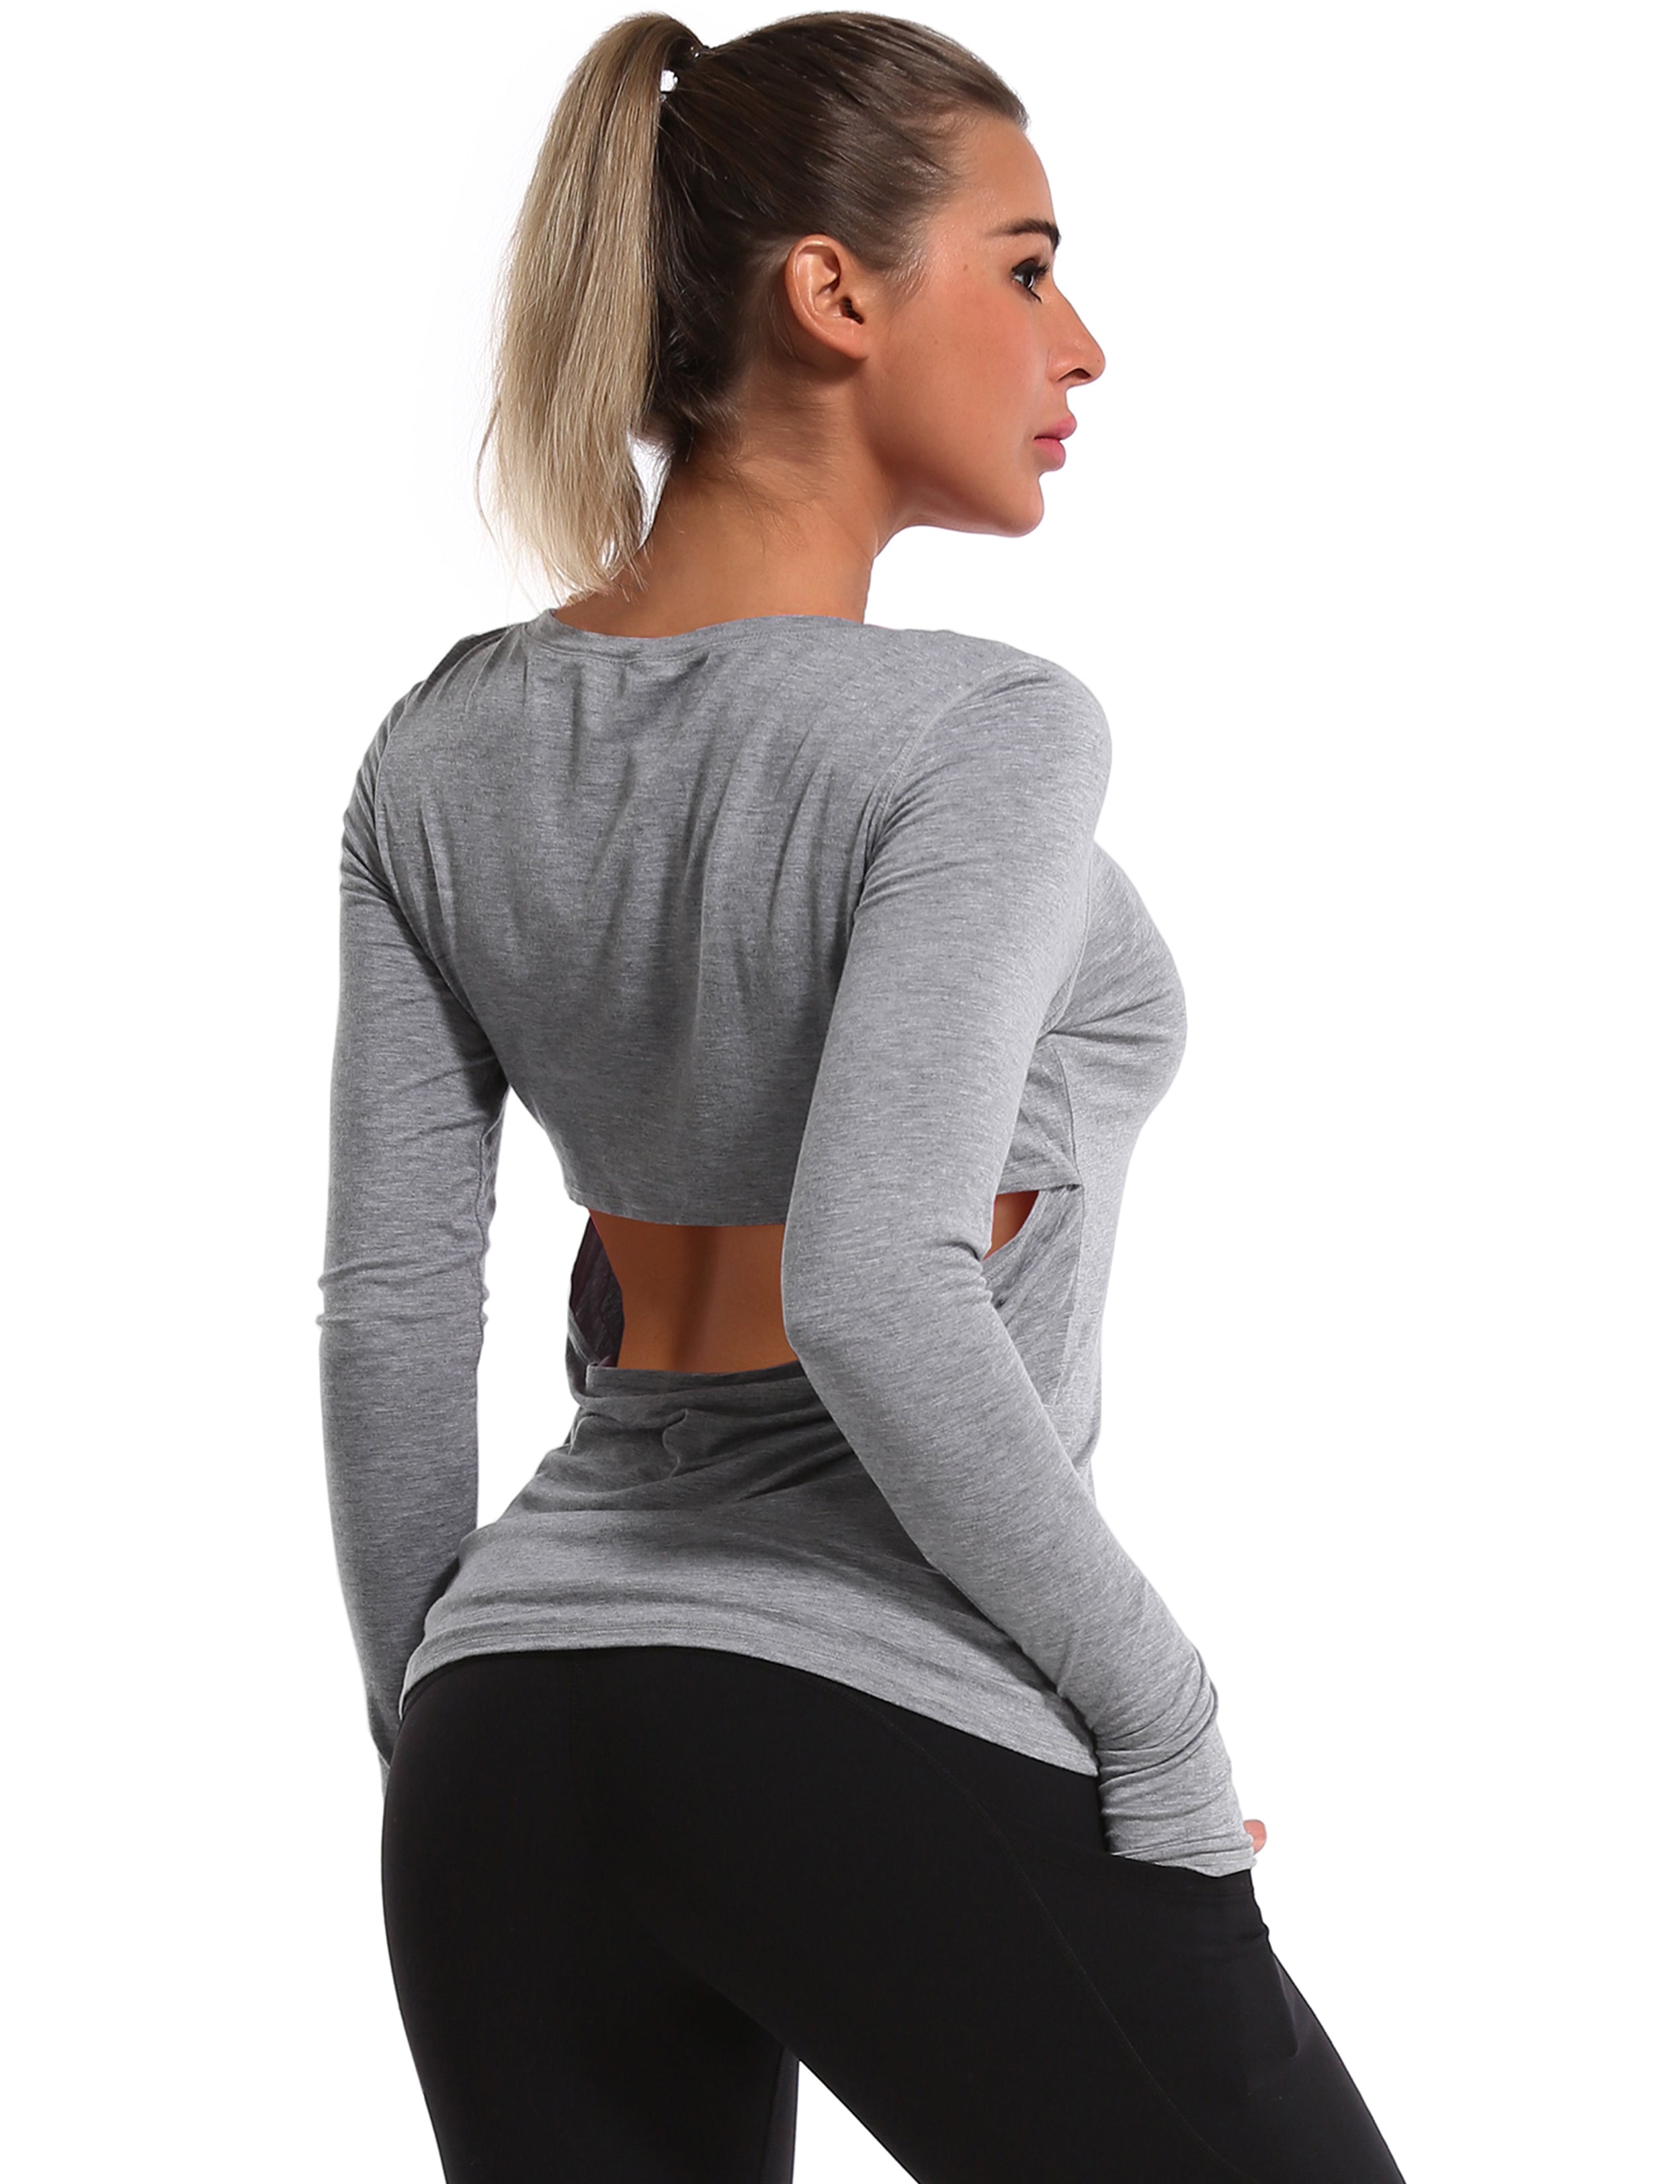 Open Back Long Sleeve Tops heathergray Designed for On the Move Slim fit 93%Modal/7%Spandex Four-way stretch Naturally breathable Super-Soft, Modal Fabric